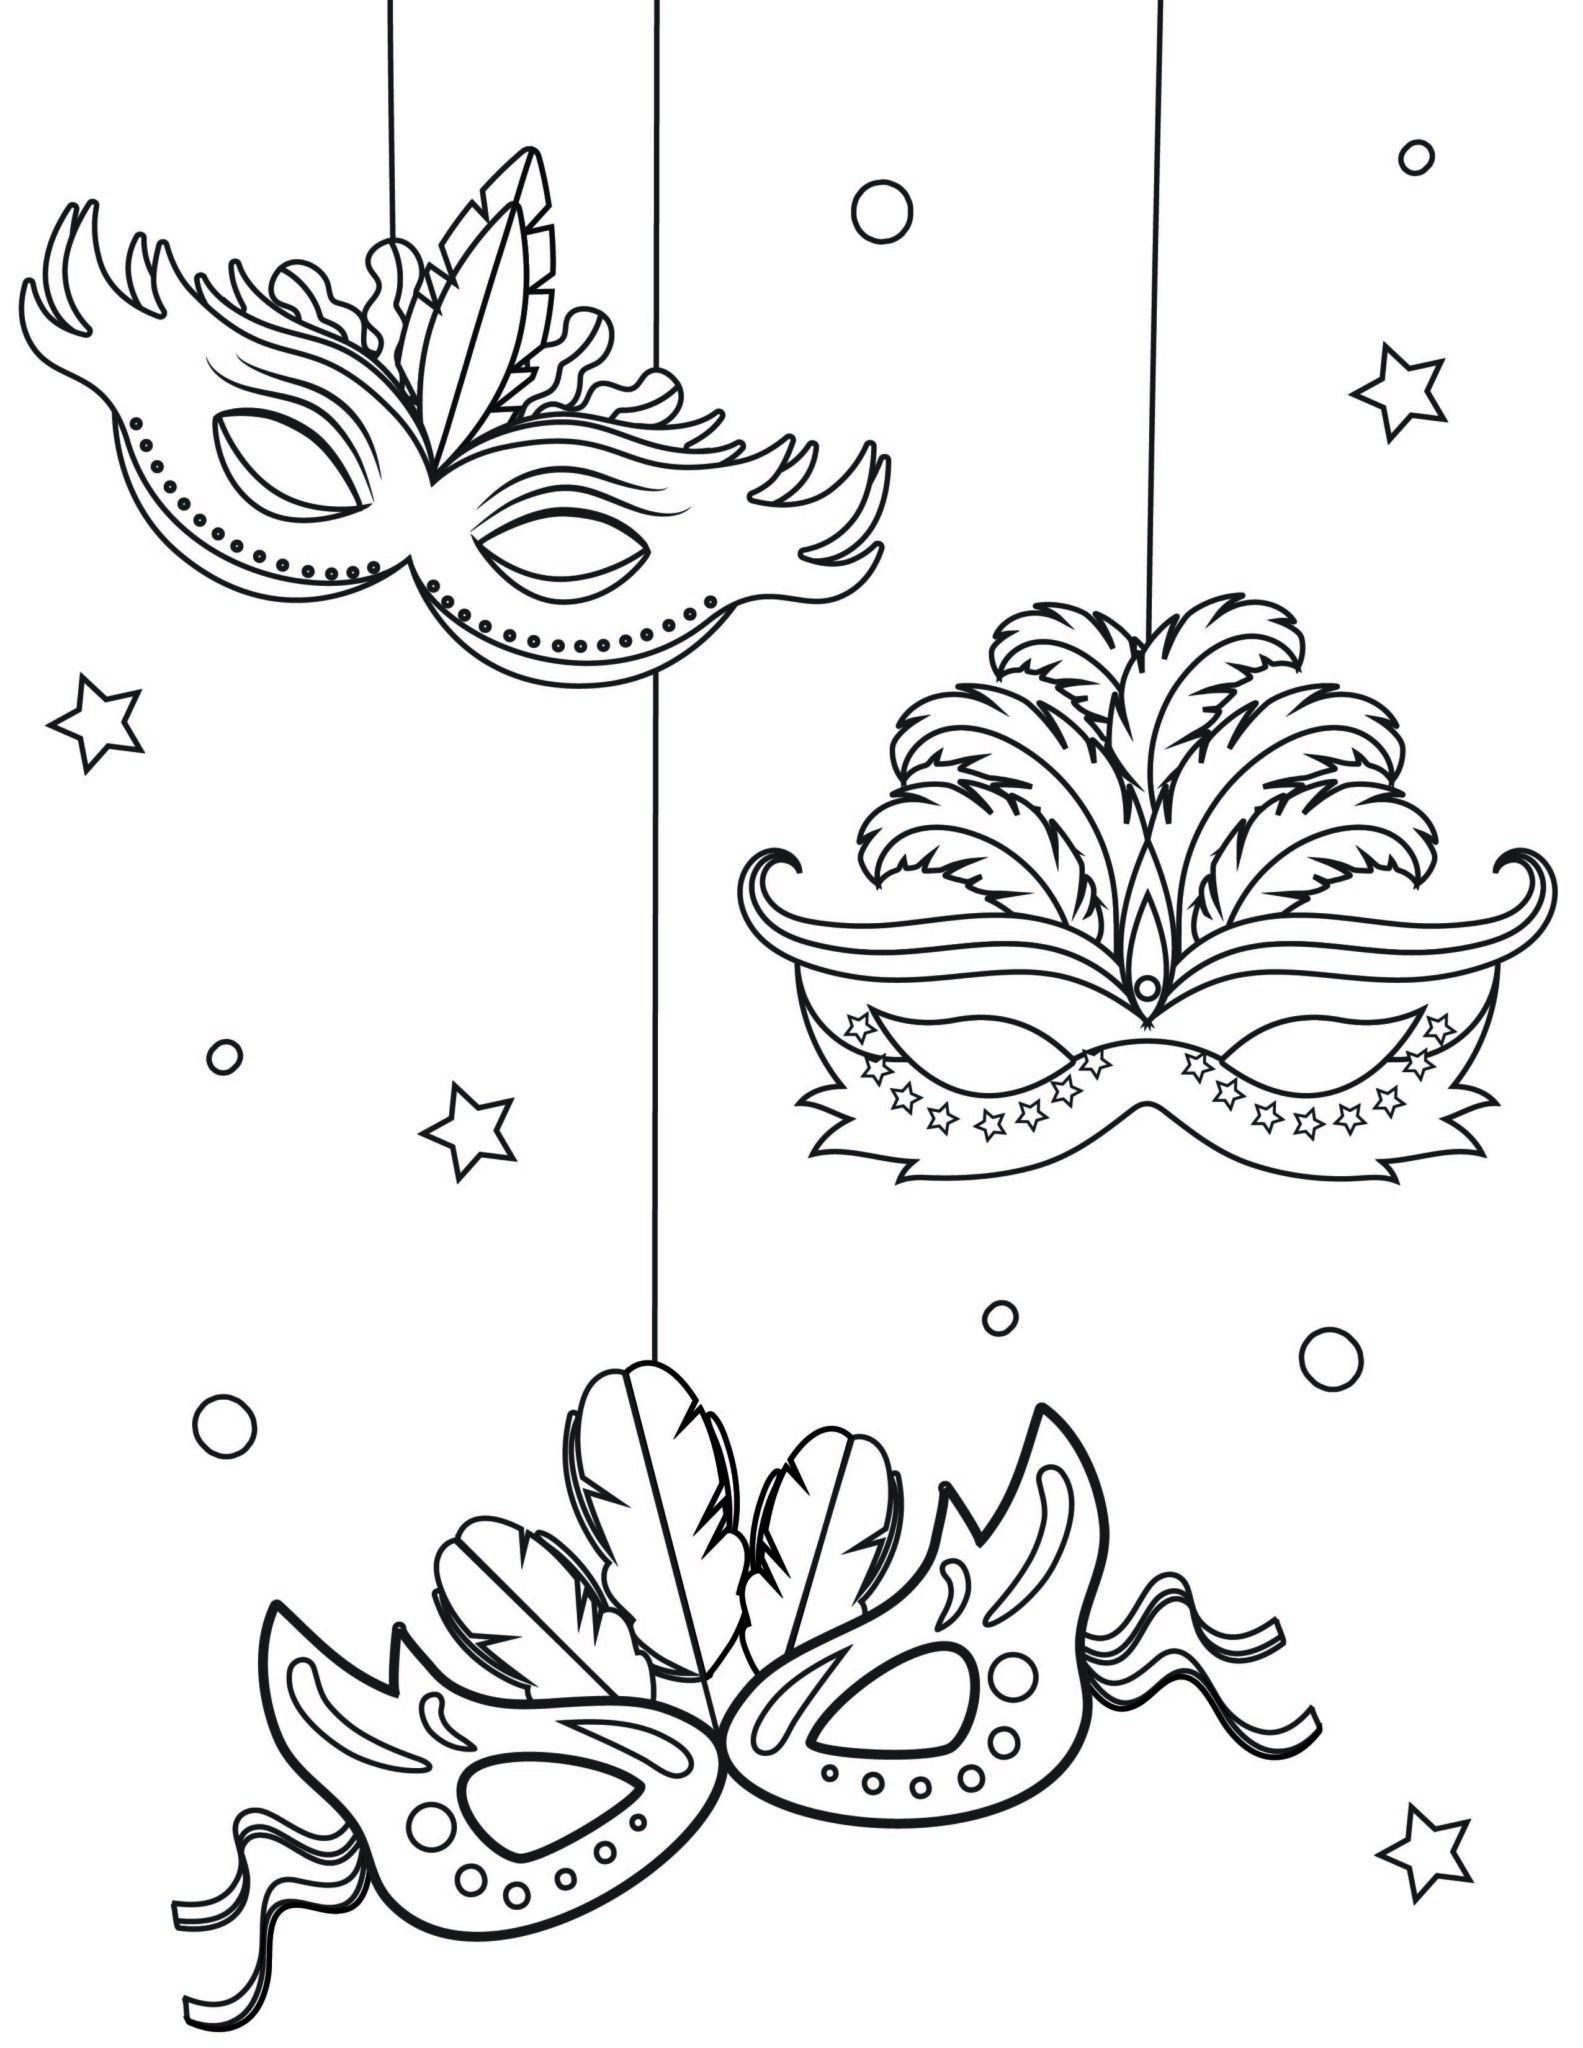 Celebrate Mardi Gras with these Coloring Pages